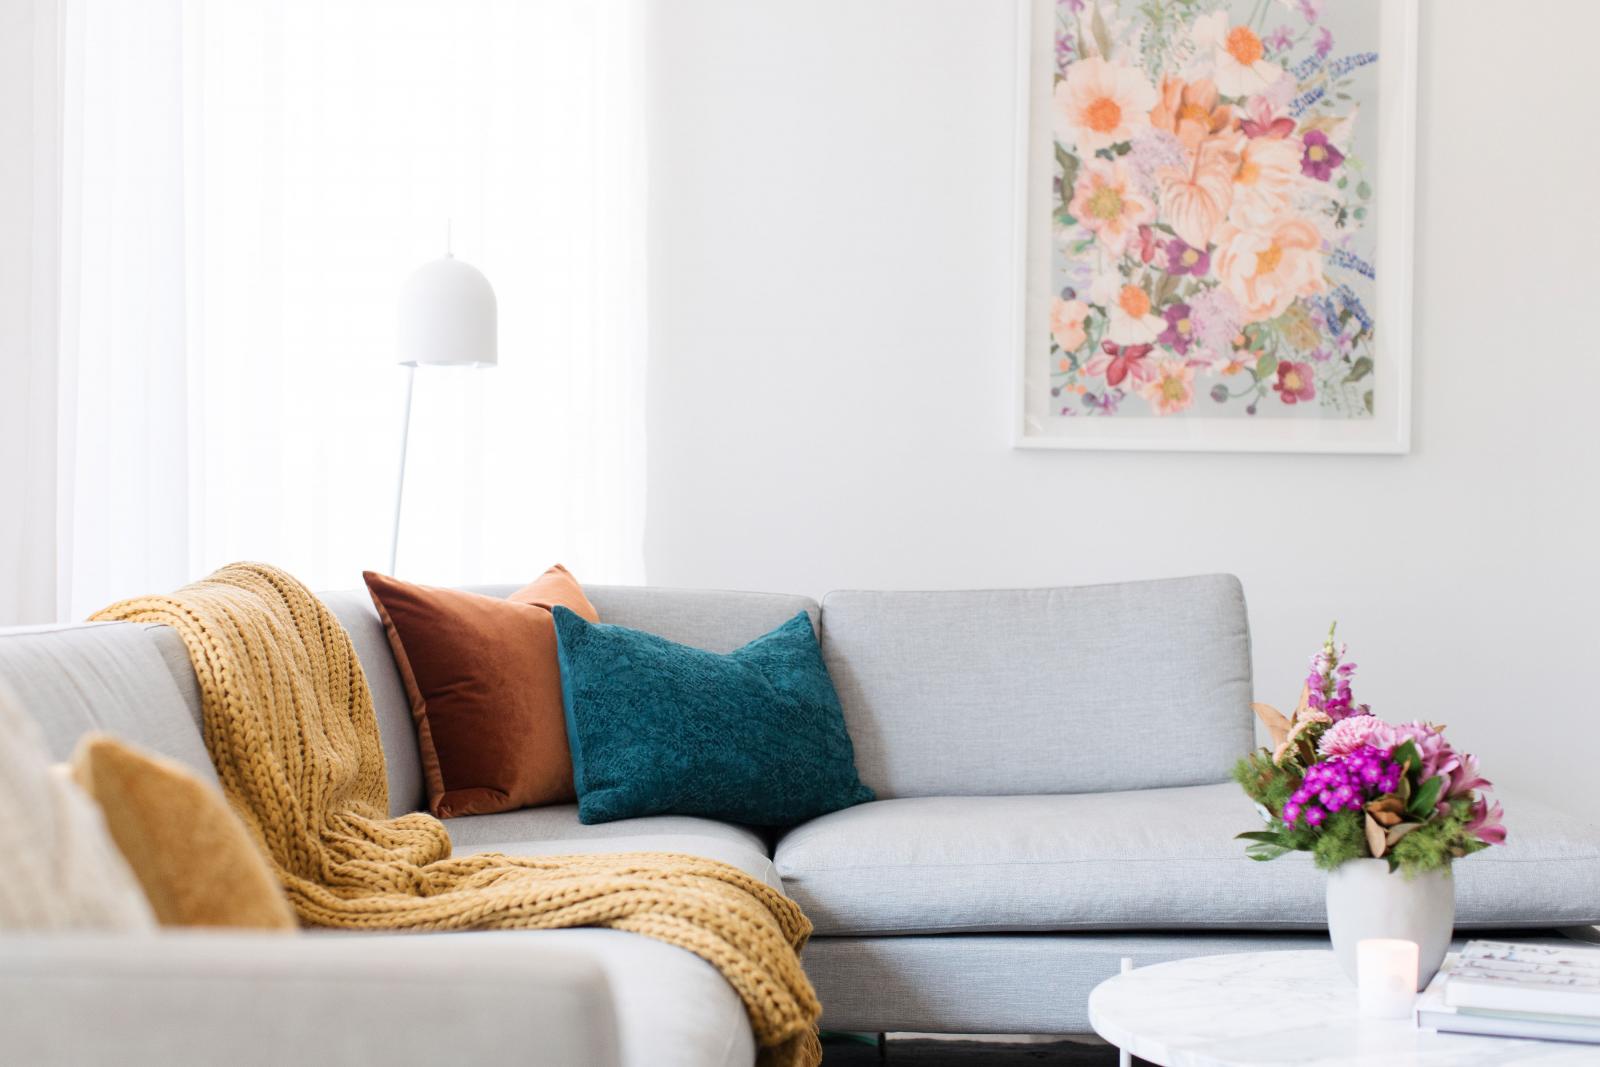 How to update your living room for less: Top decorating ideas to suit your budget